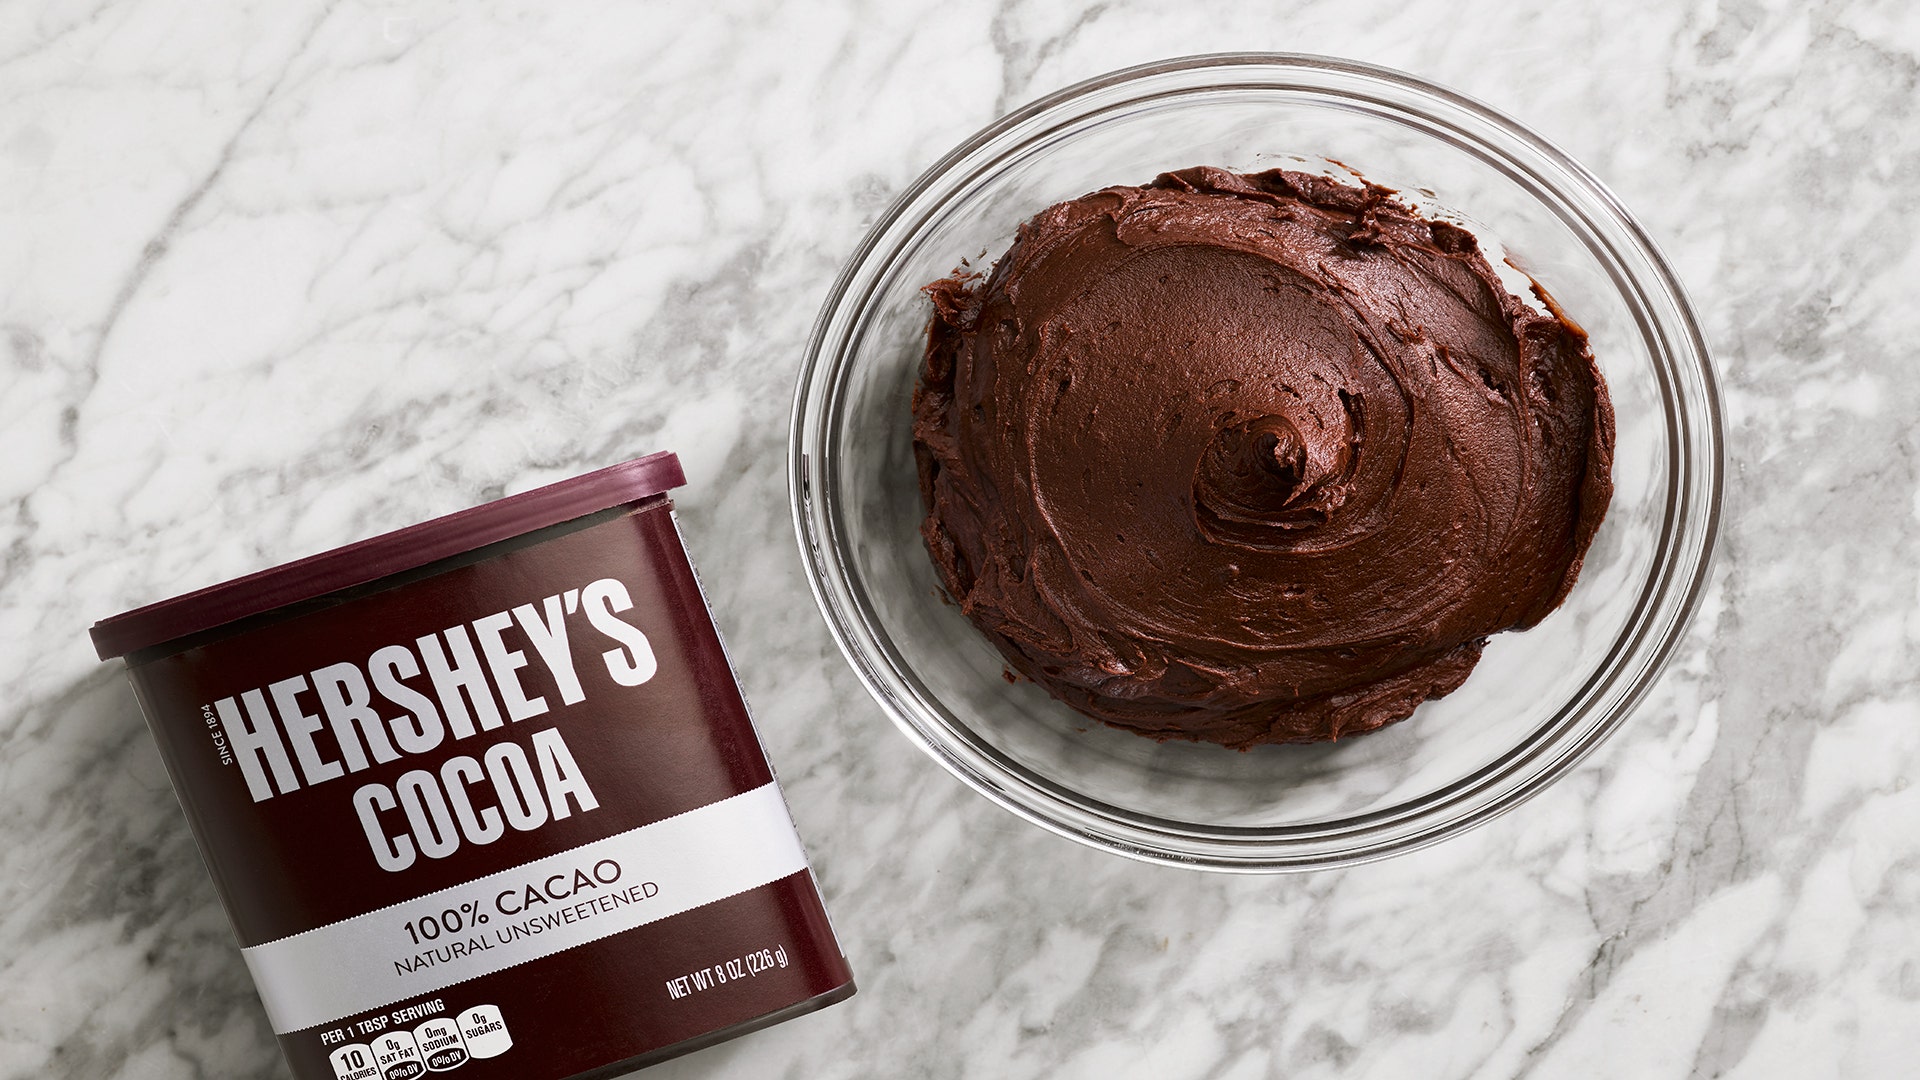 “Perfectly Chocolate” Chocolate Frosting